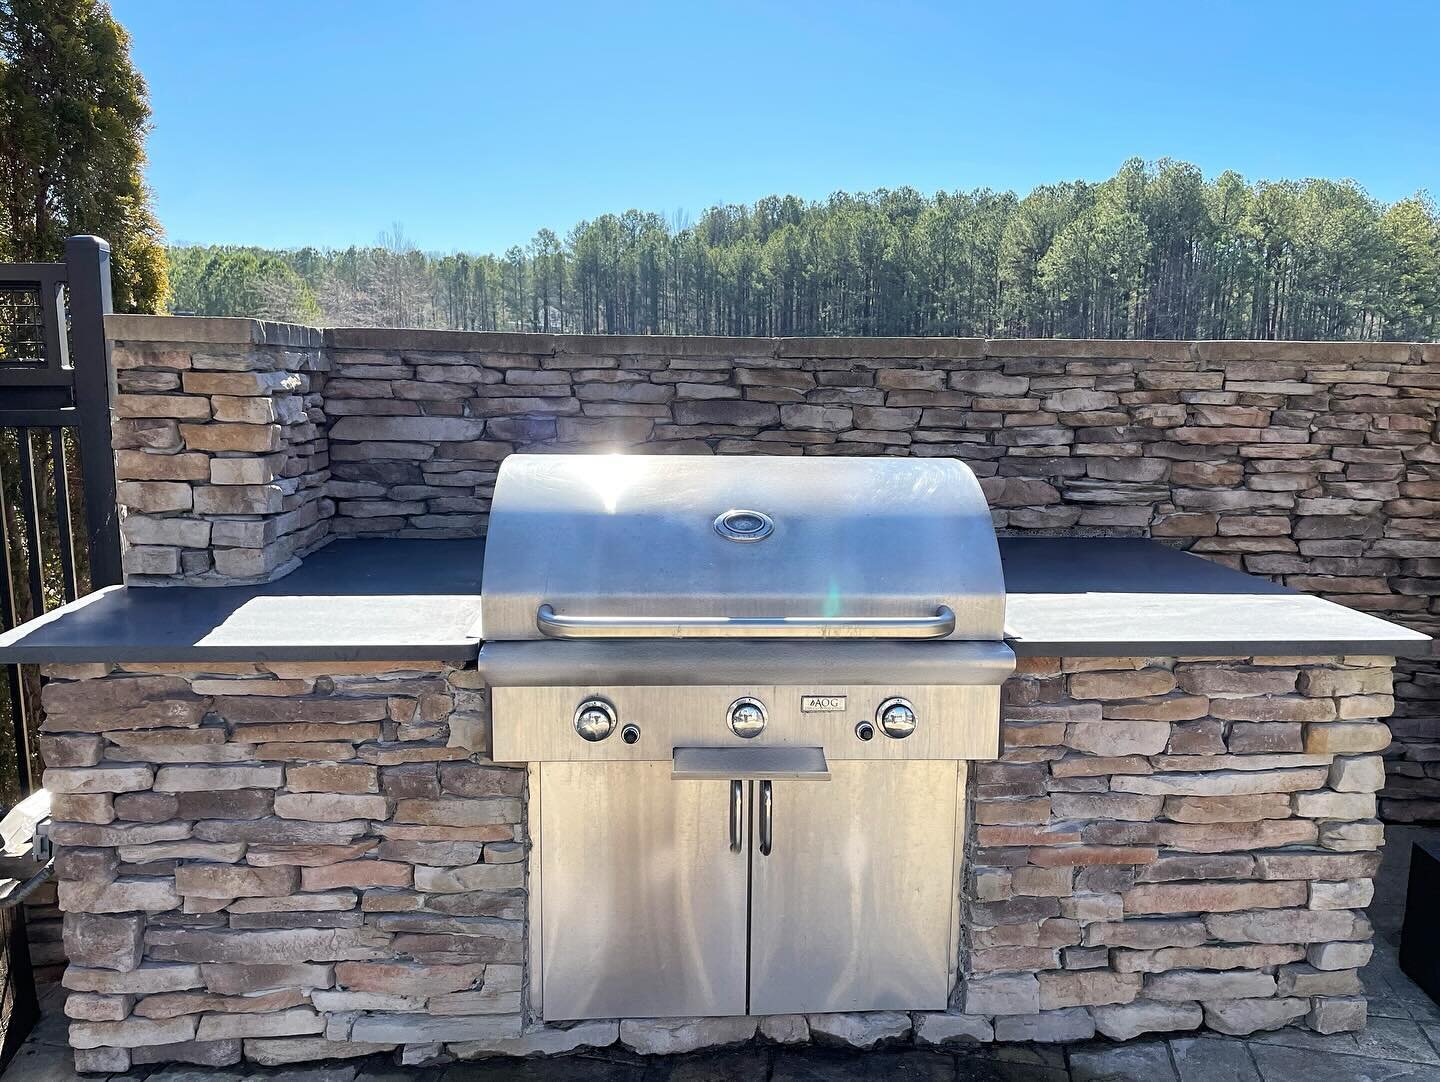 ✨Amenity Spotlight✨ Did you know we have TWO grills located on property? They are both natural gas, so no need to worry about propane or charcoal! Let us know where they are located and if you love to grill 🔥